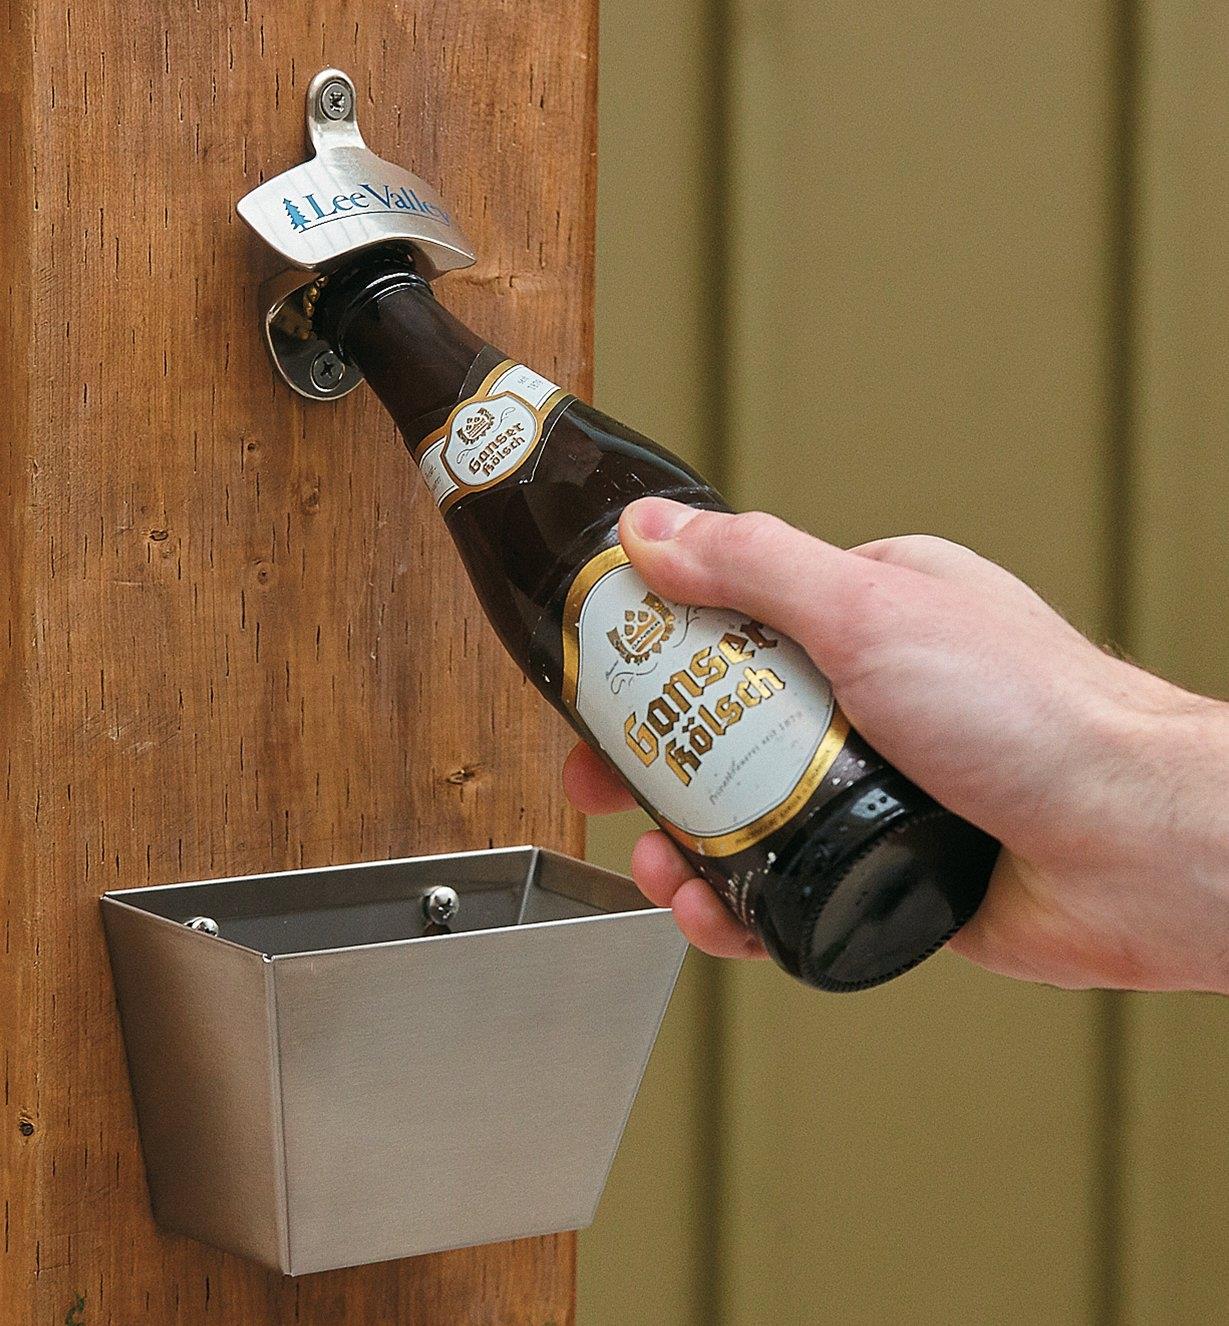 NEW BEER BOTTLE OPENER Wall Mount w/ Box Cap Catcher FREE SHIPPING & Key-Chain 